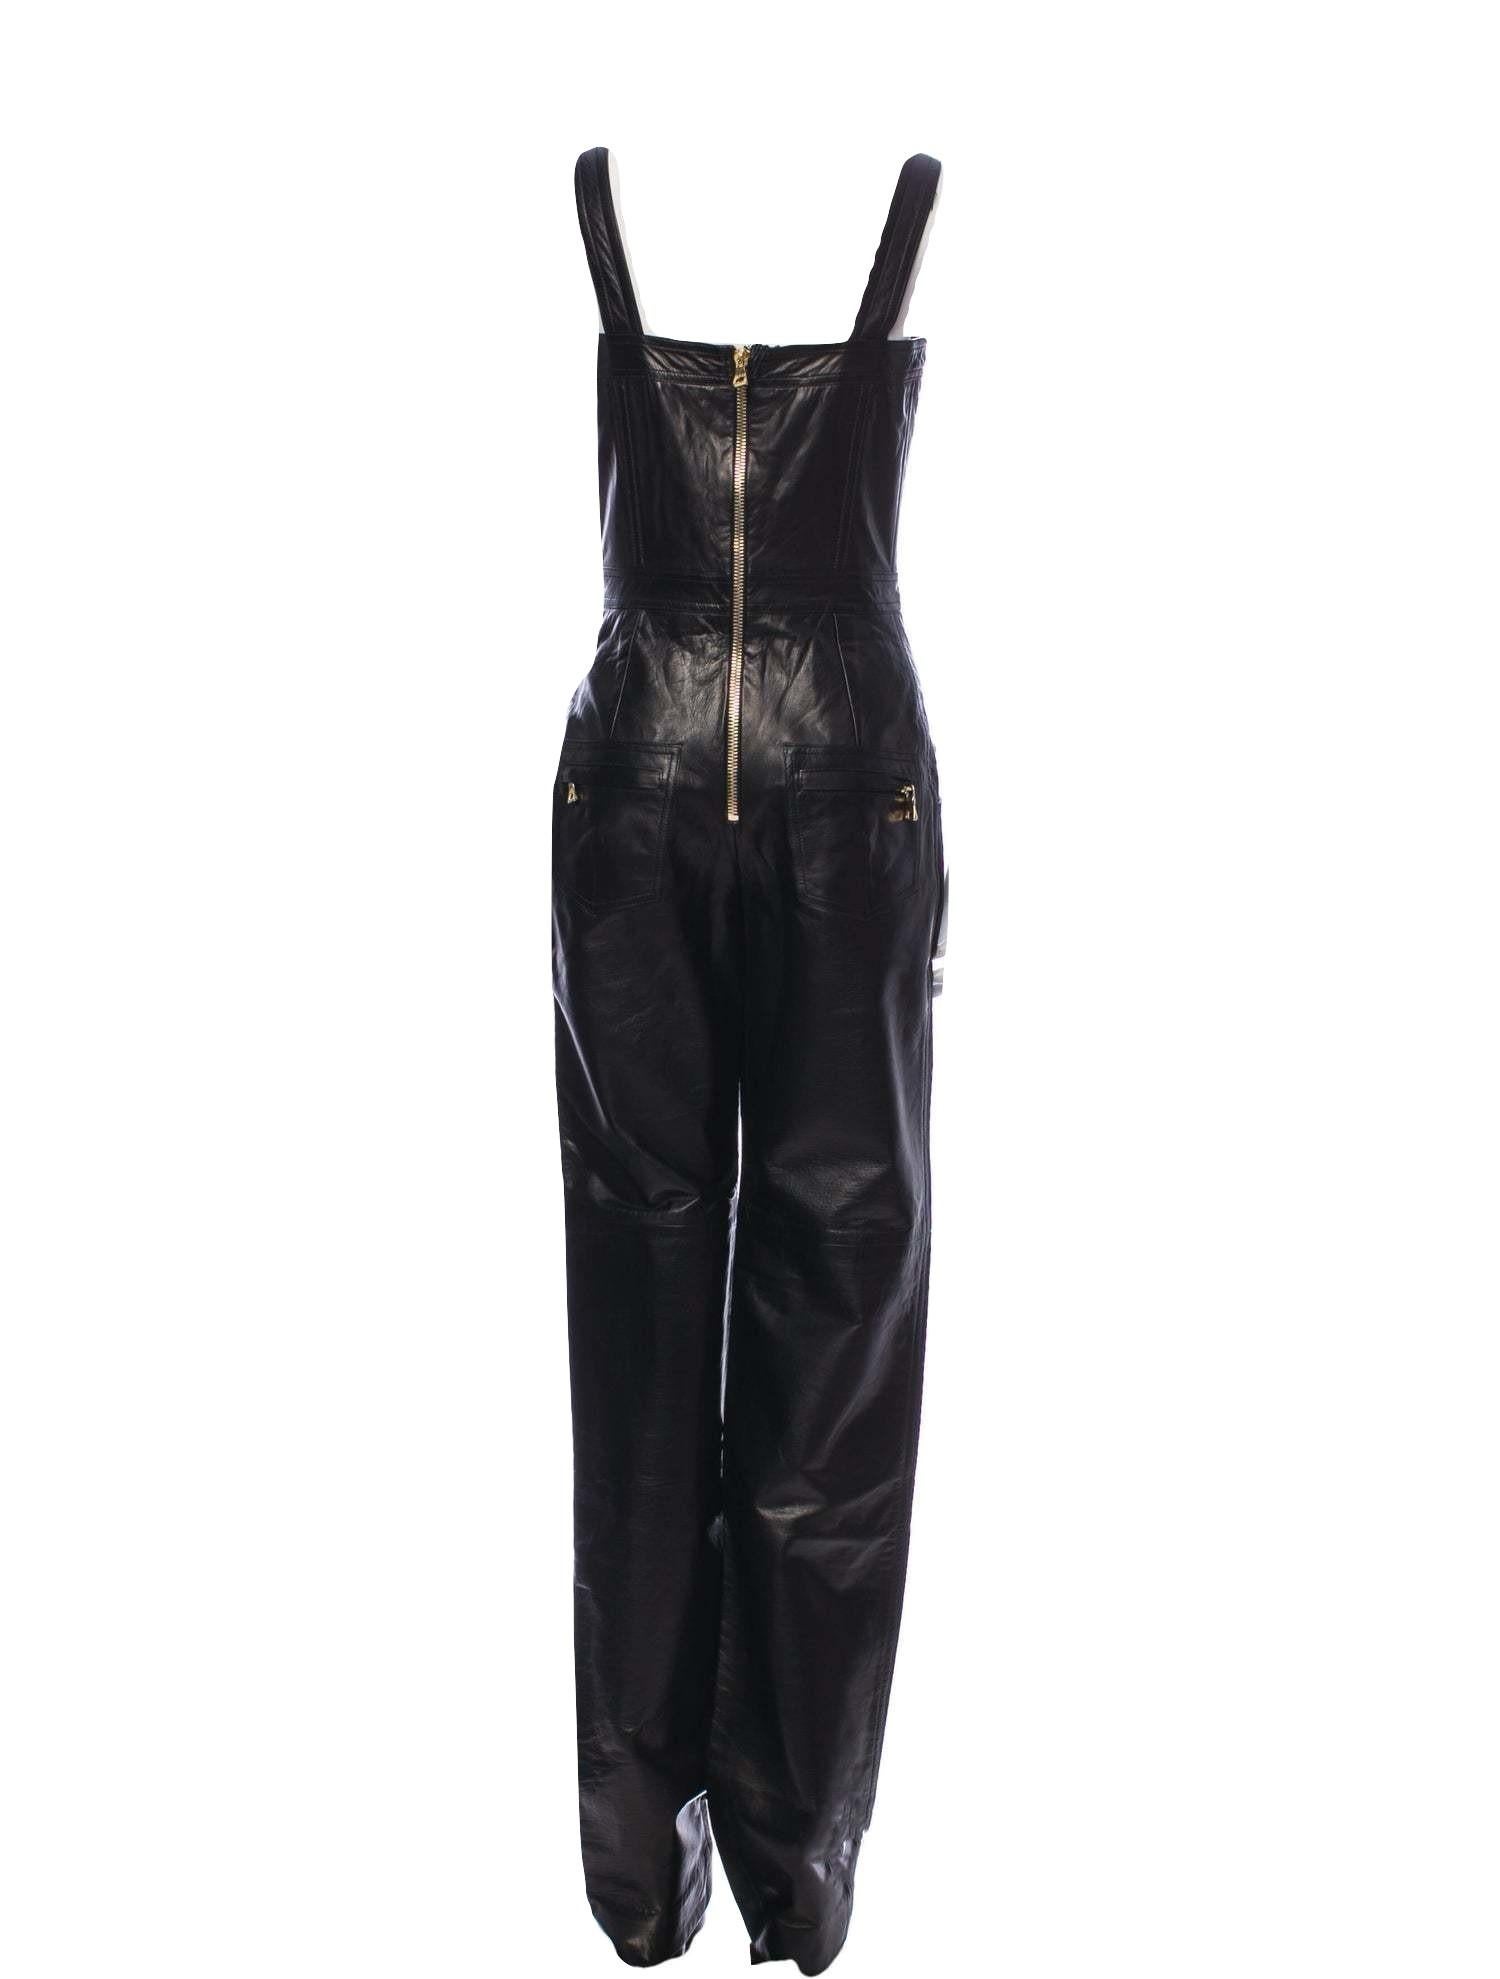 Women's New Balmain Black Leather Jumpsuit Size FR38 $5000 With Tags